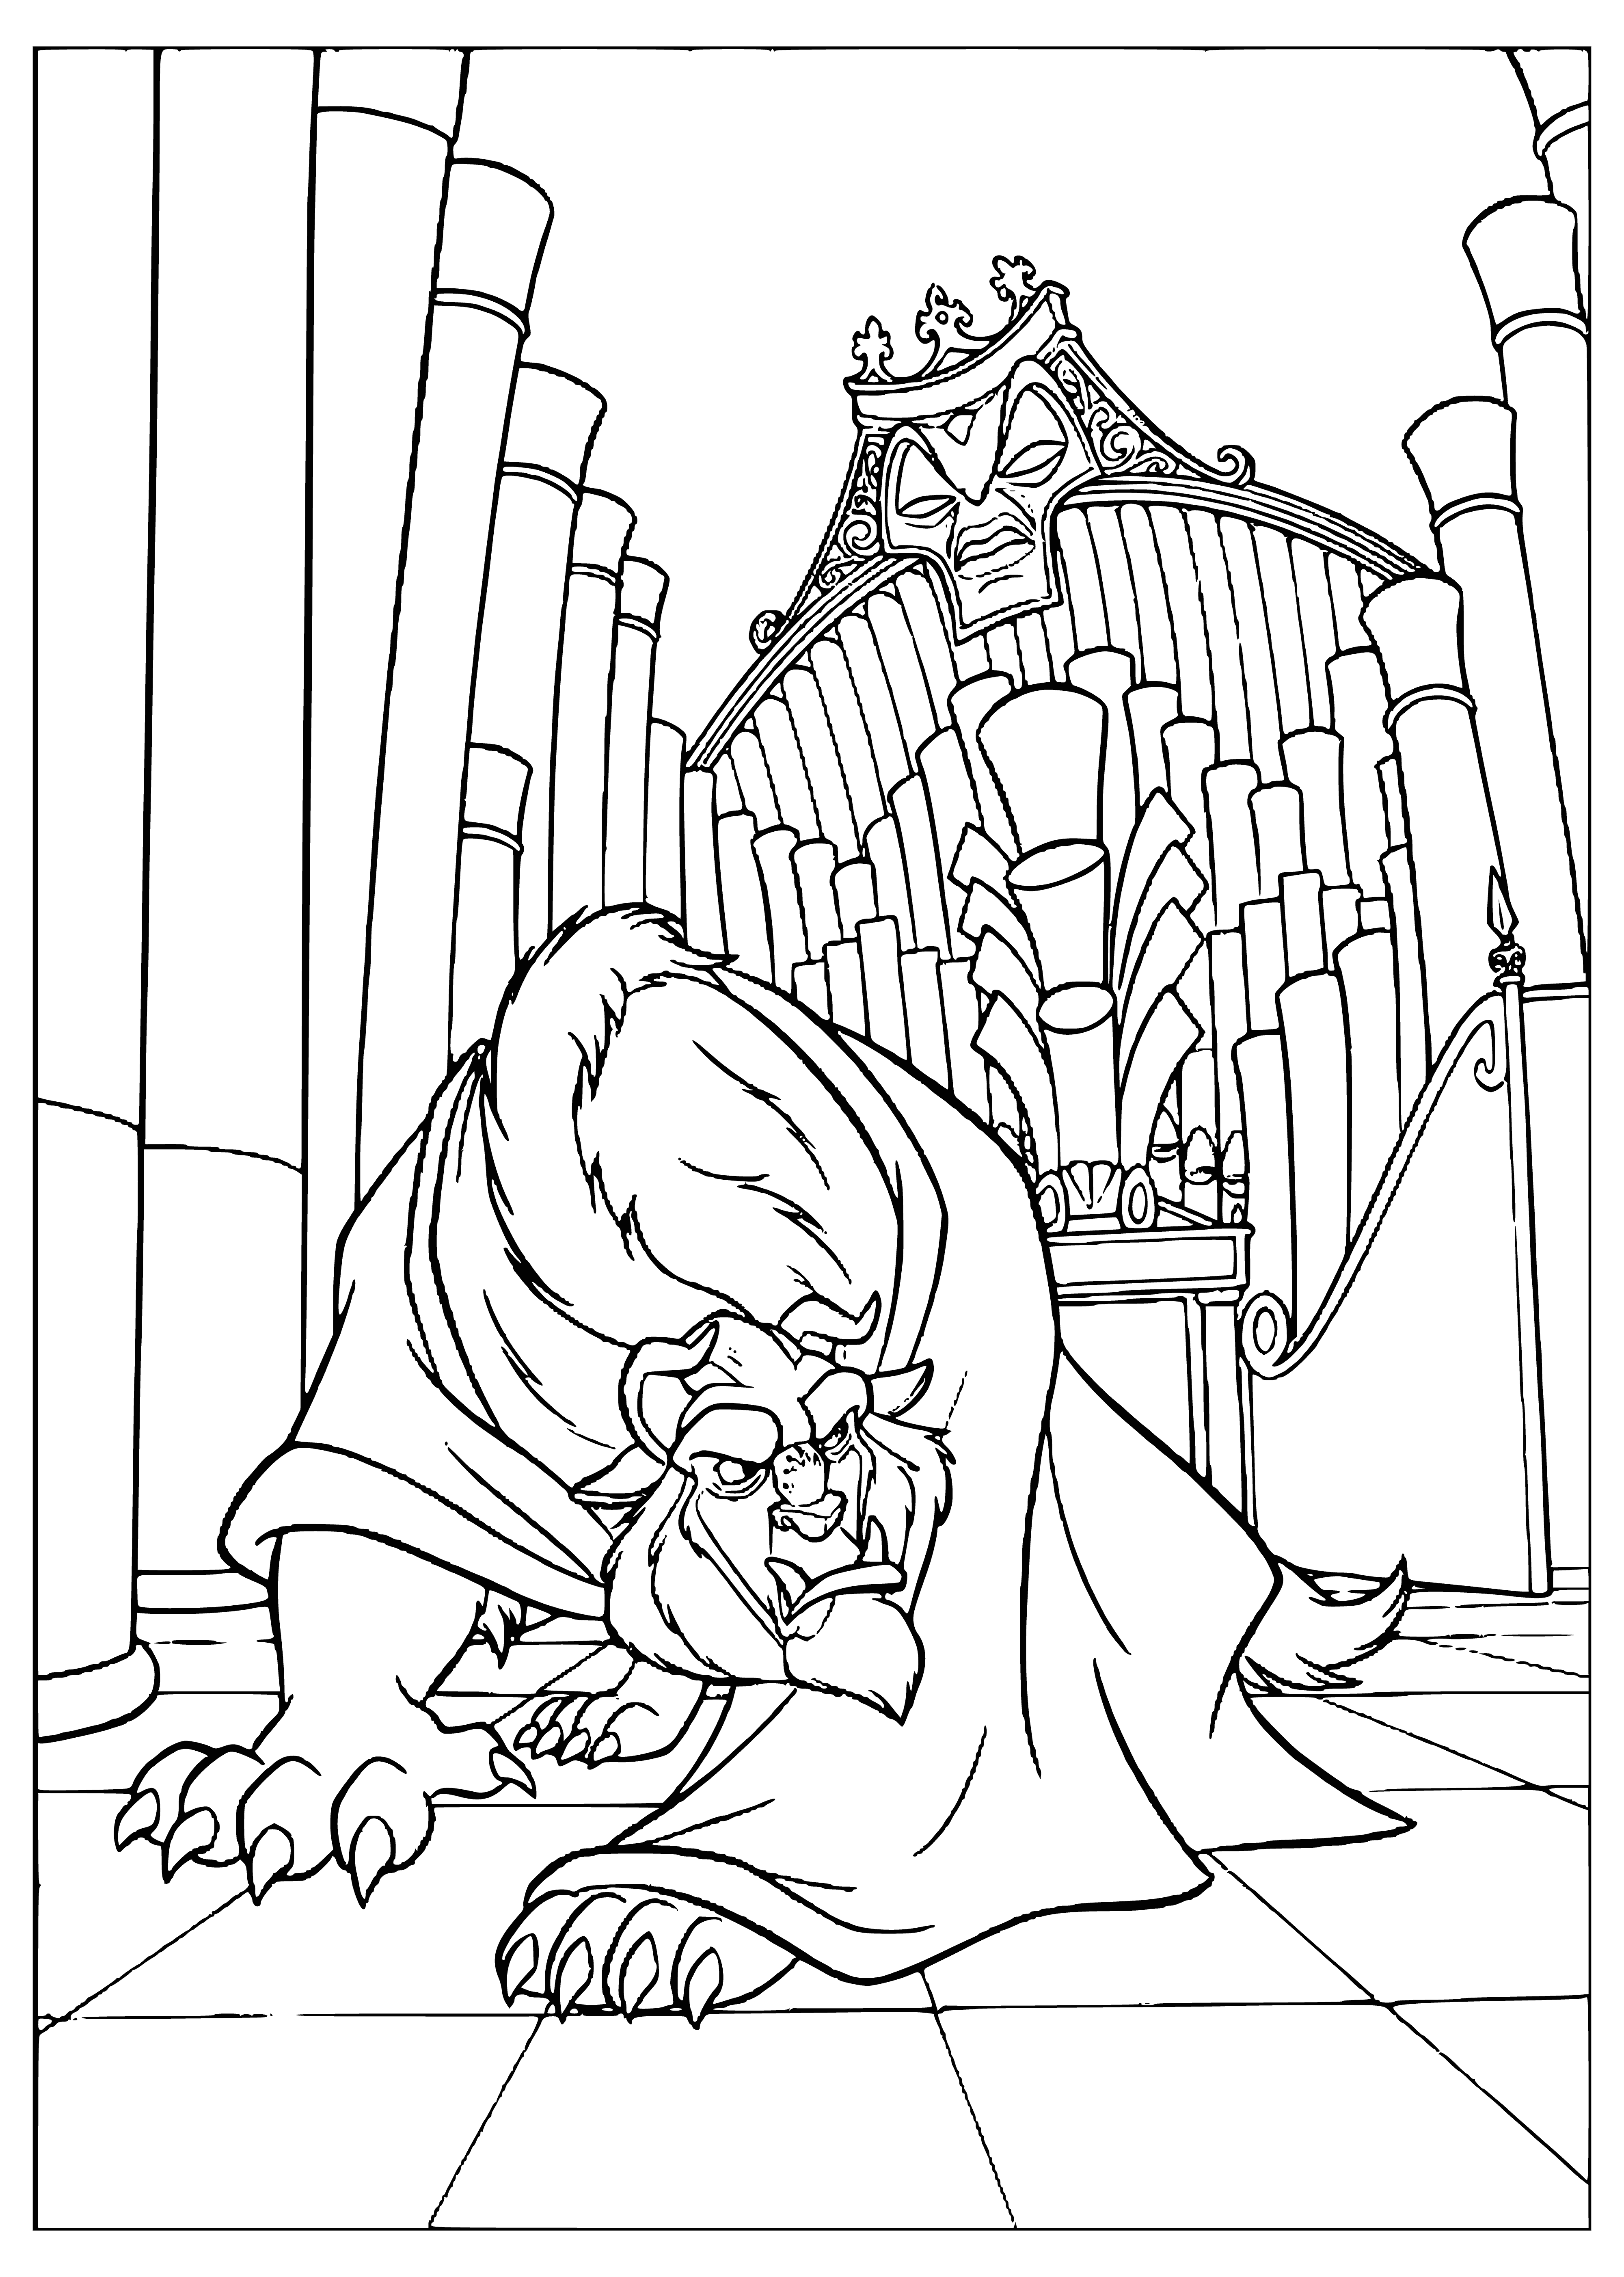 coloring page: Dark creature with red eyes & claws, small creature on its back, standing on dark rock; faint castle outline in background.